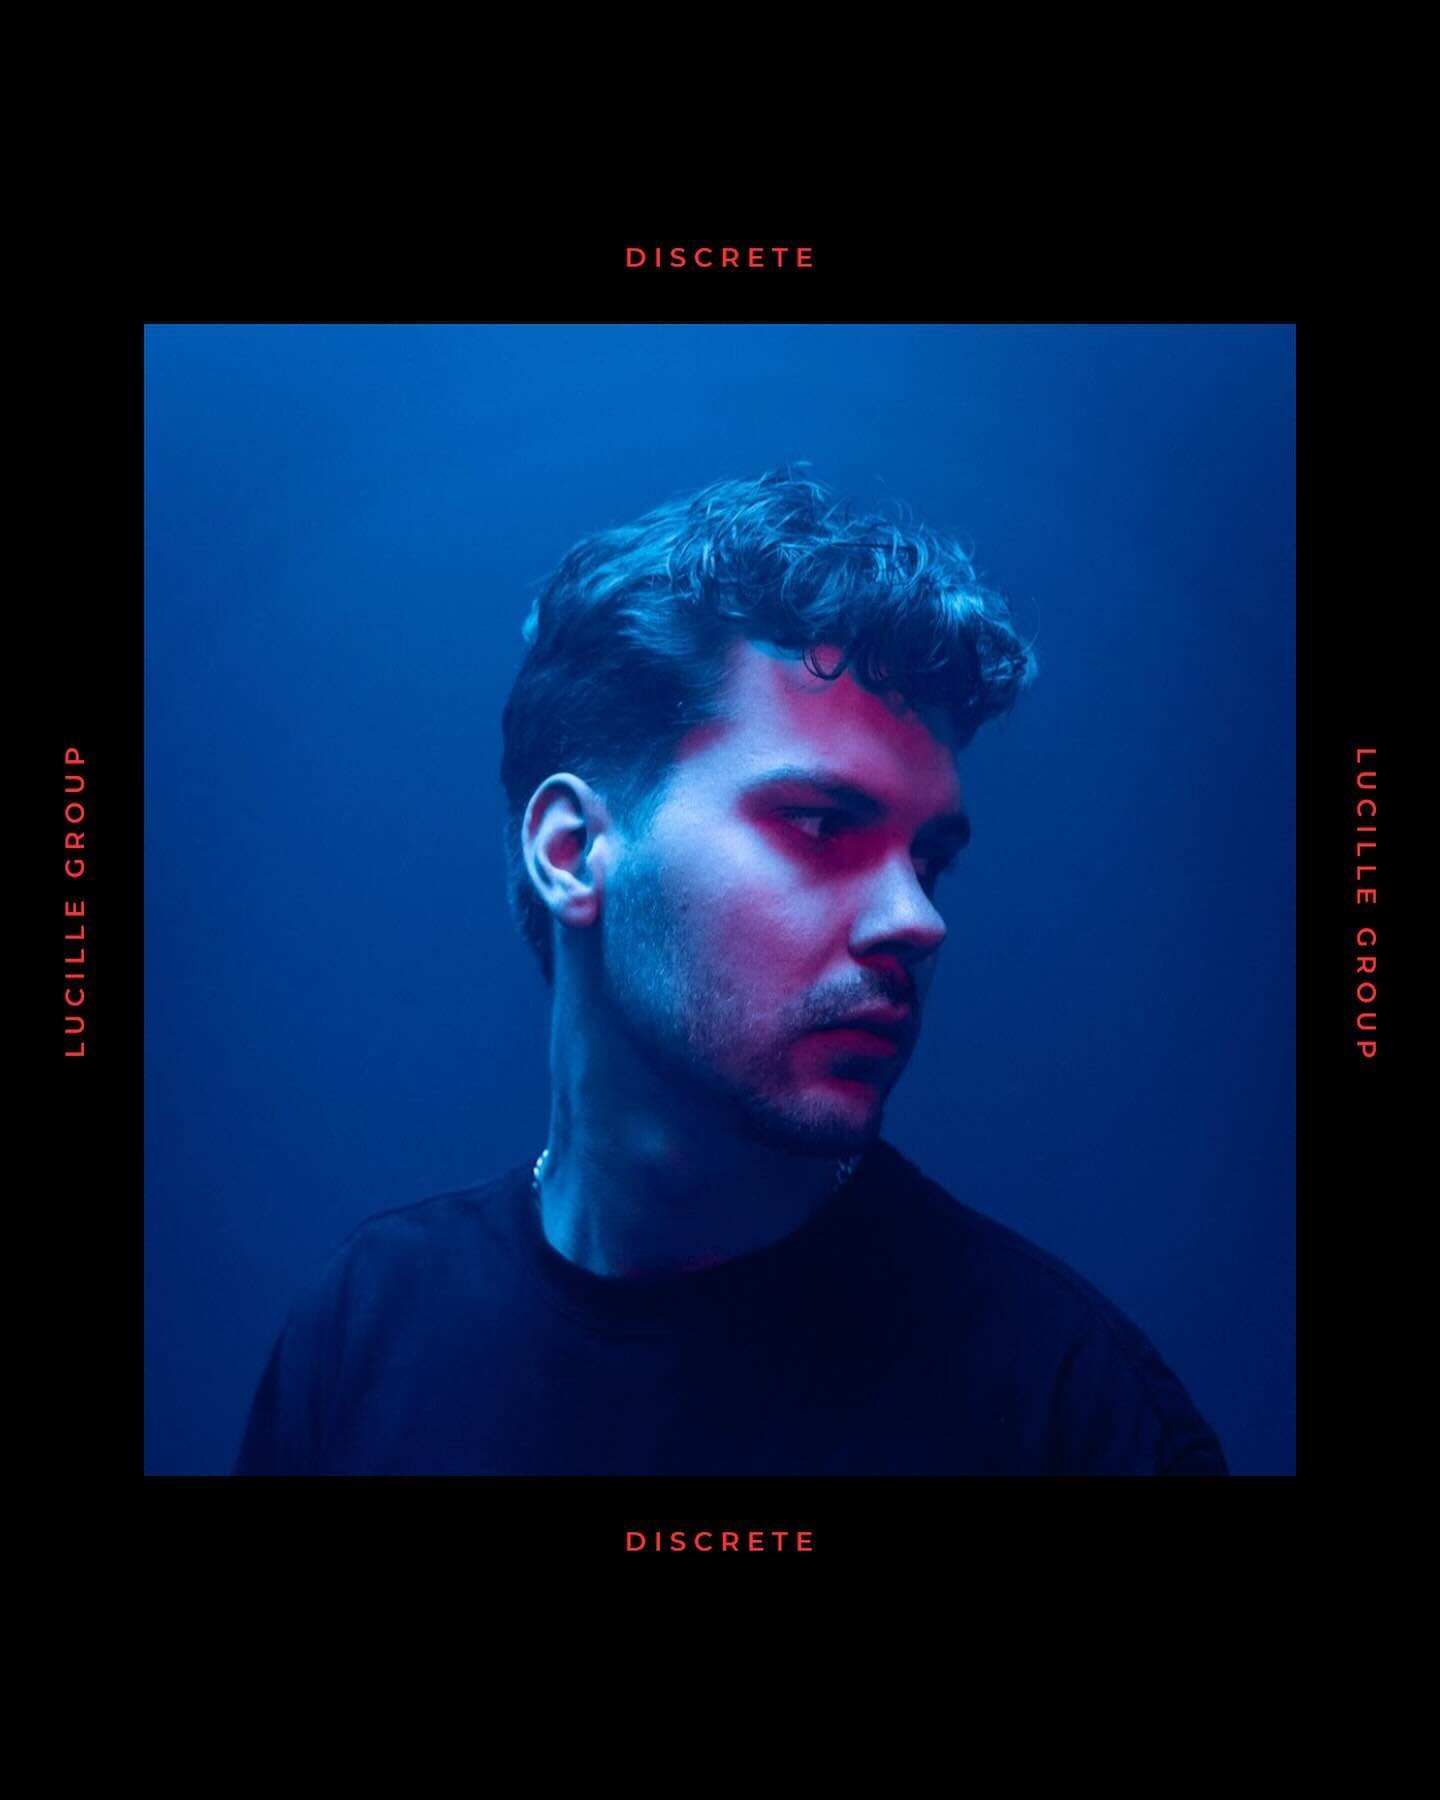 Swedish artist and producer Discrete has had an interest in music production since he was only 13 years old and his career took off when releasing his debut single &ldquo;WITHOUT YOU.&rdquo; in 2018. Today he has a catalog of over 200 million streams